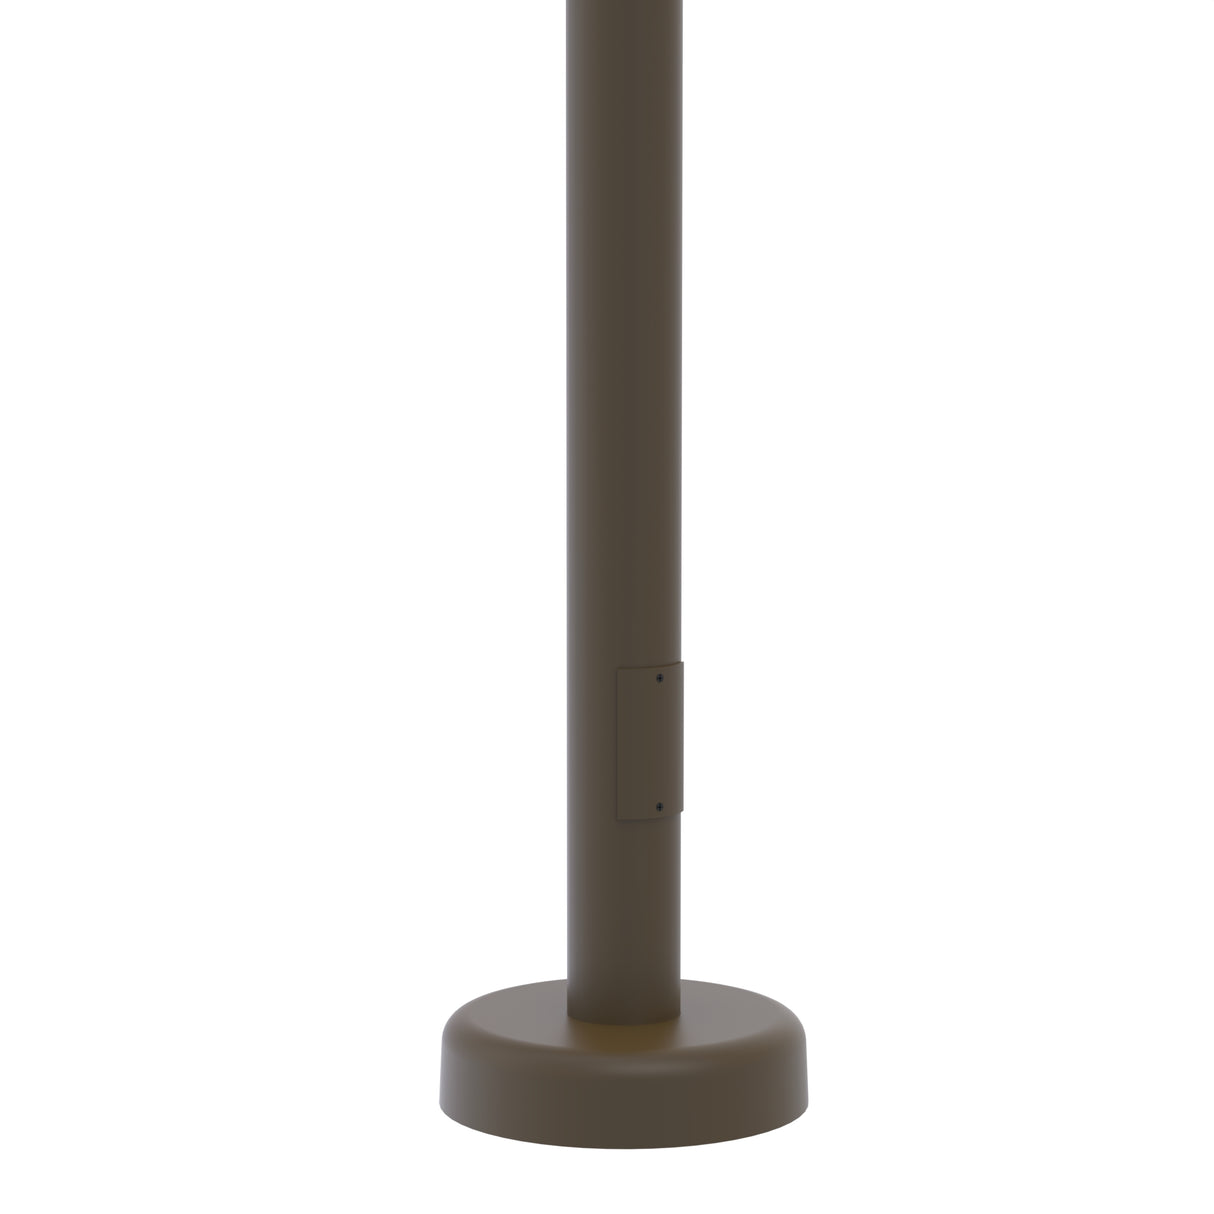 16' Tall x 6.0" OD x 0.188" Thick, Round Straight Aluminum, Hinged Anchor Base Light Pole